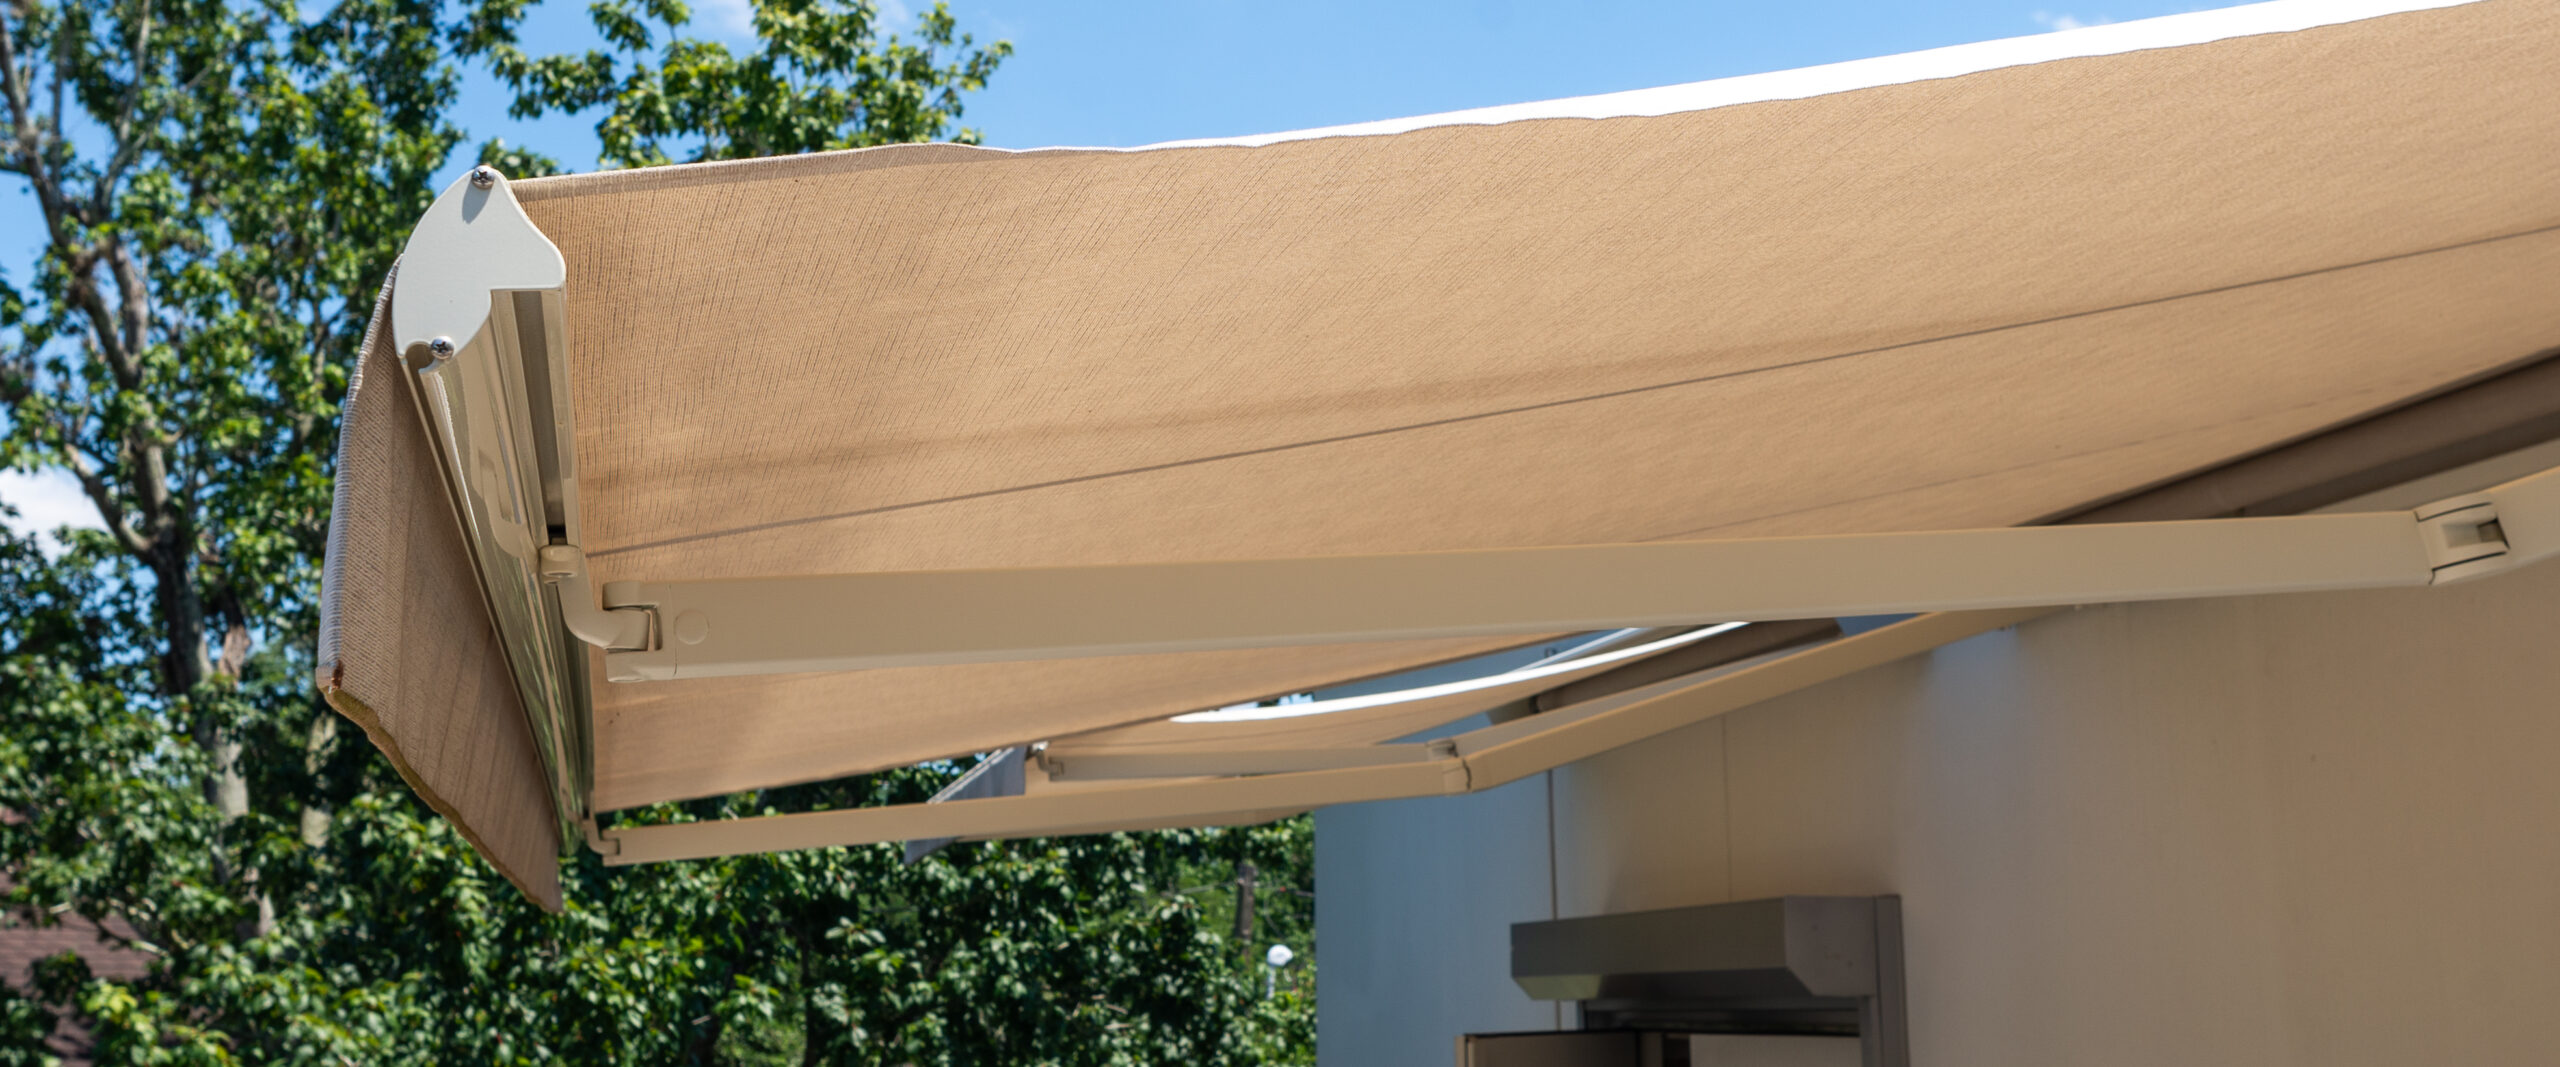 Retractable Awning at Open Position